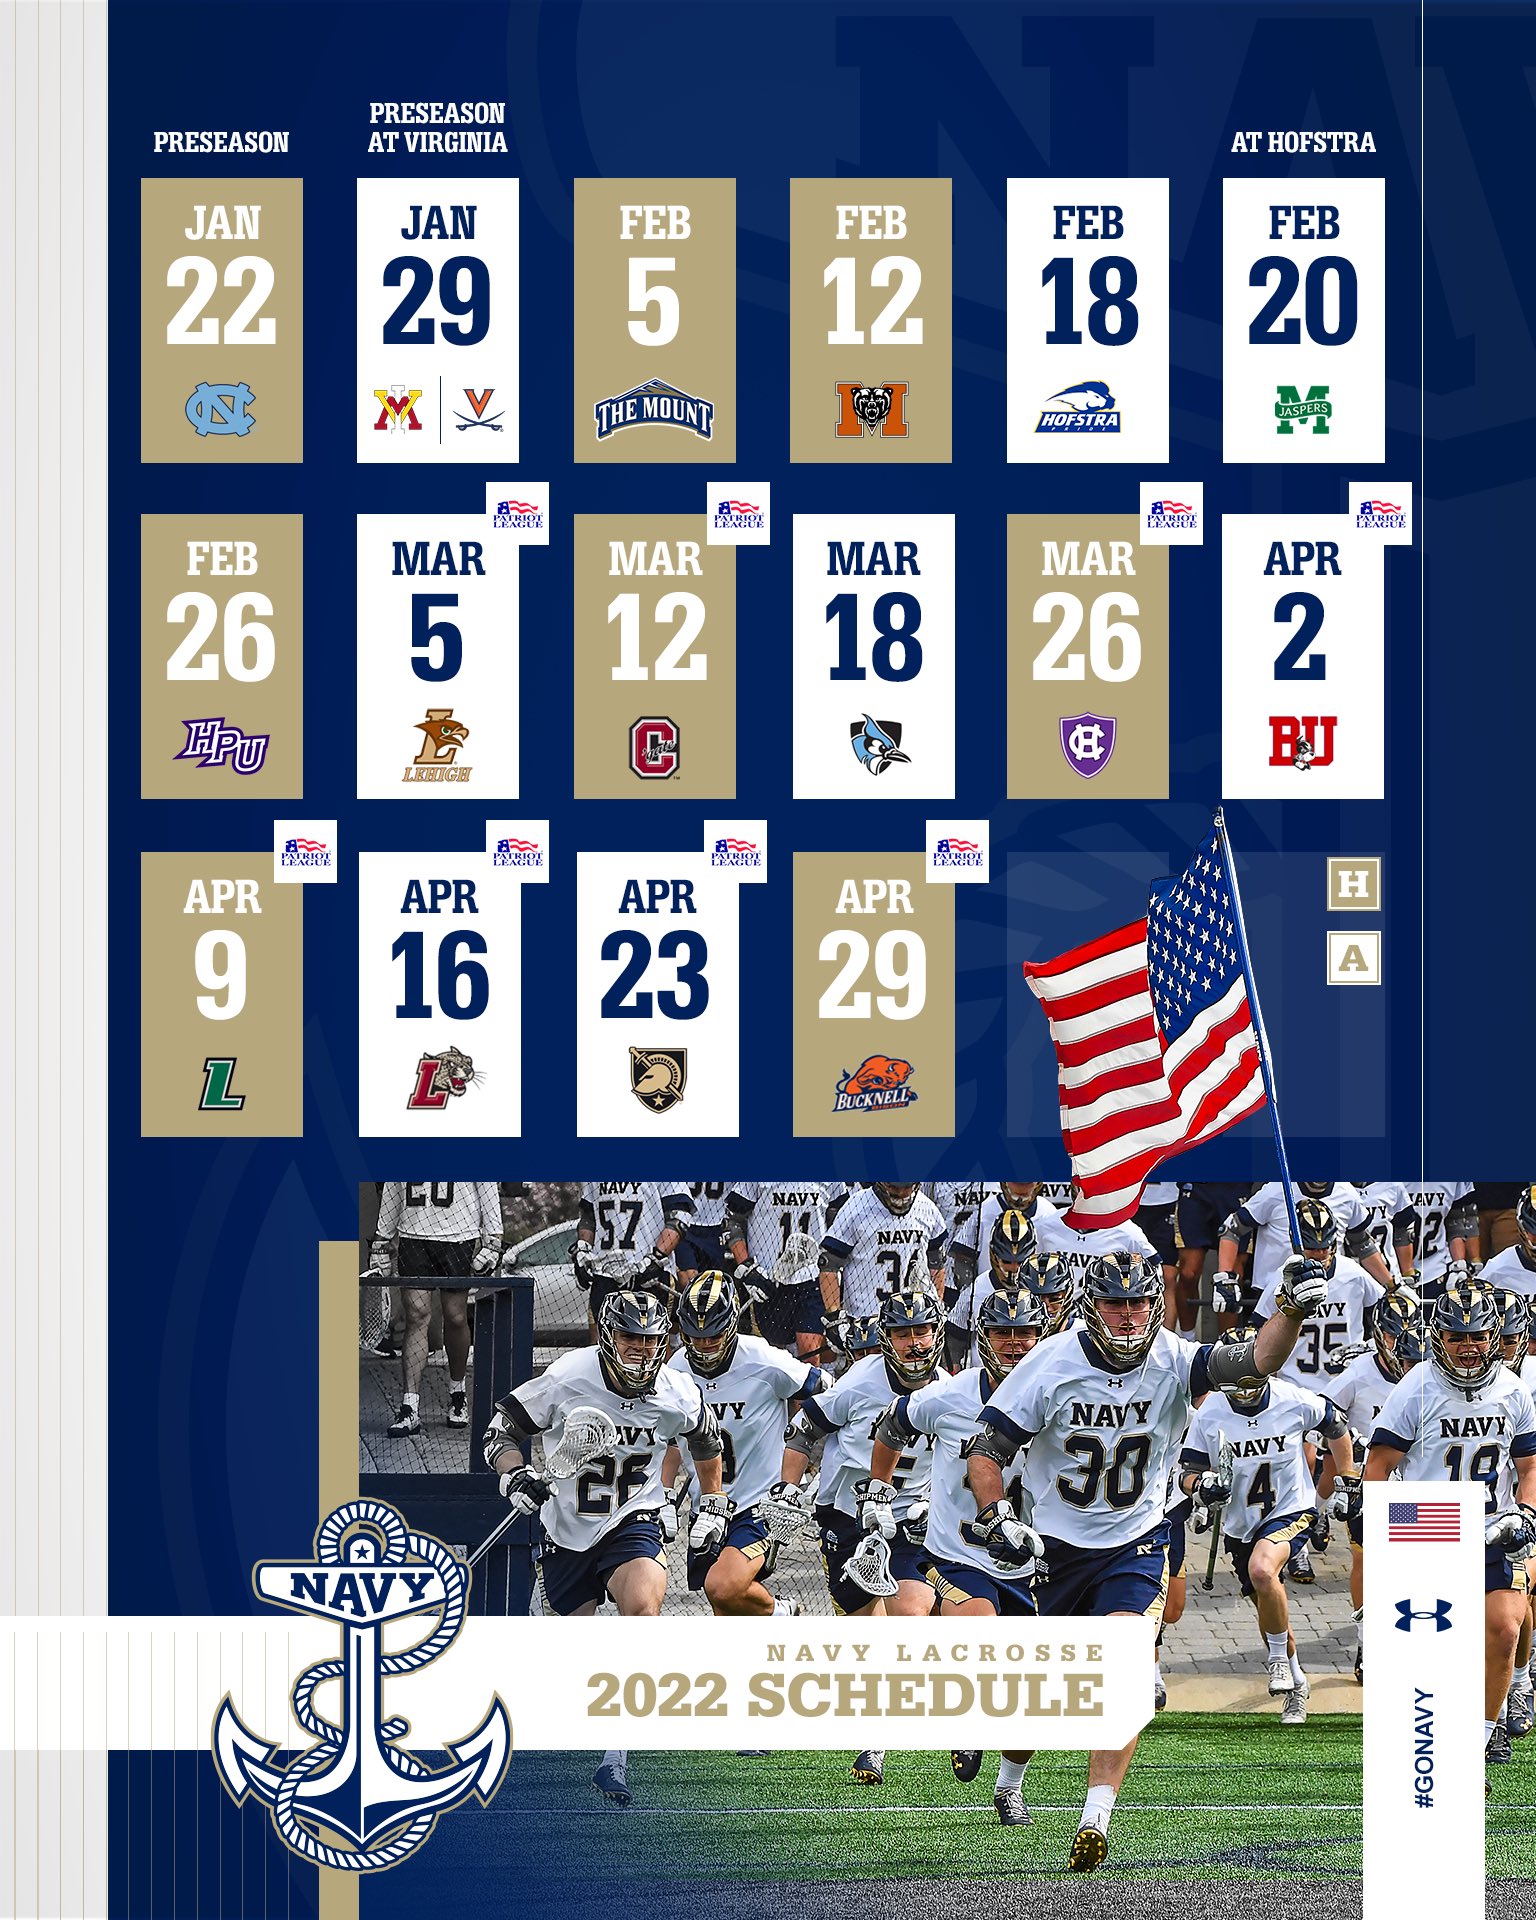 Navy Lacrosse Schedule 2022 Navy Men's Lacrosse On Twitter: "🚨🚨🚨Damn The Torpedoes - Full Speed  Ahead! Navy Lacrosse Fans We Are Looking Forward To Seeing You Out In Full  Force This Season! Https://T.co/Ilzpo98Wrj #Gonavy⚓️🇺🇸  Https://T.co/Bwvdbaglmd" /